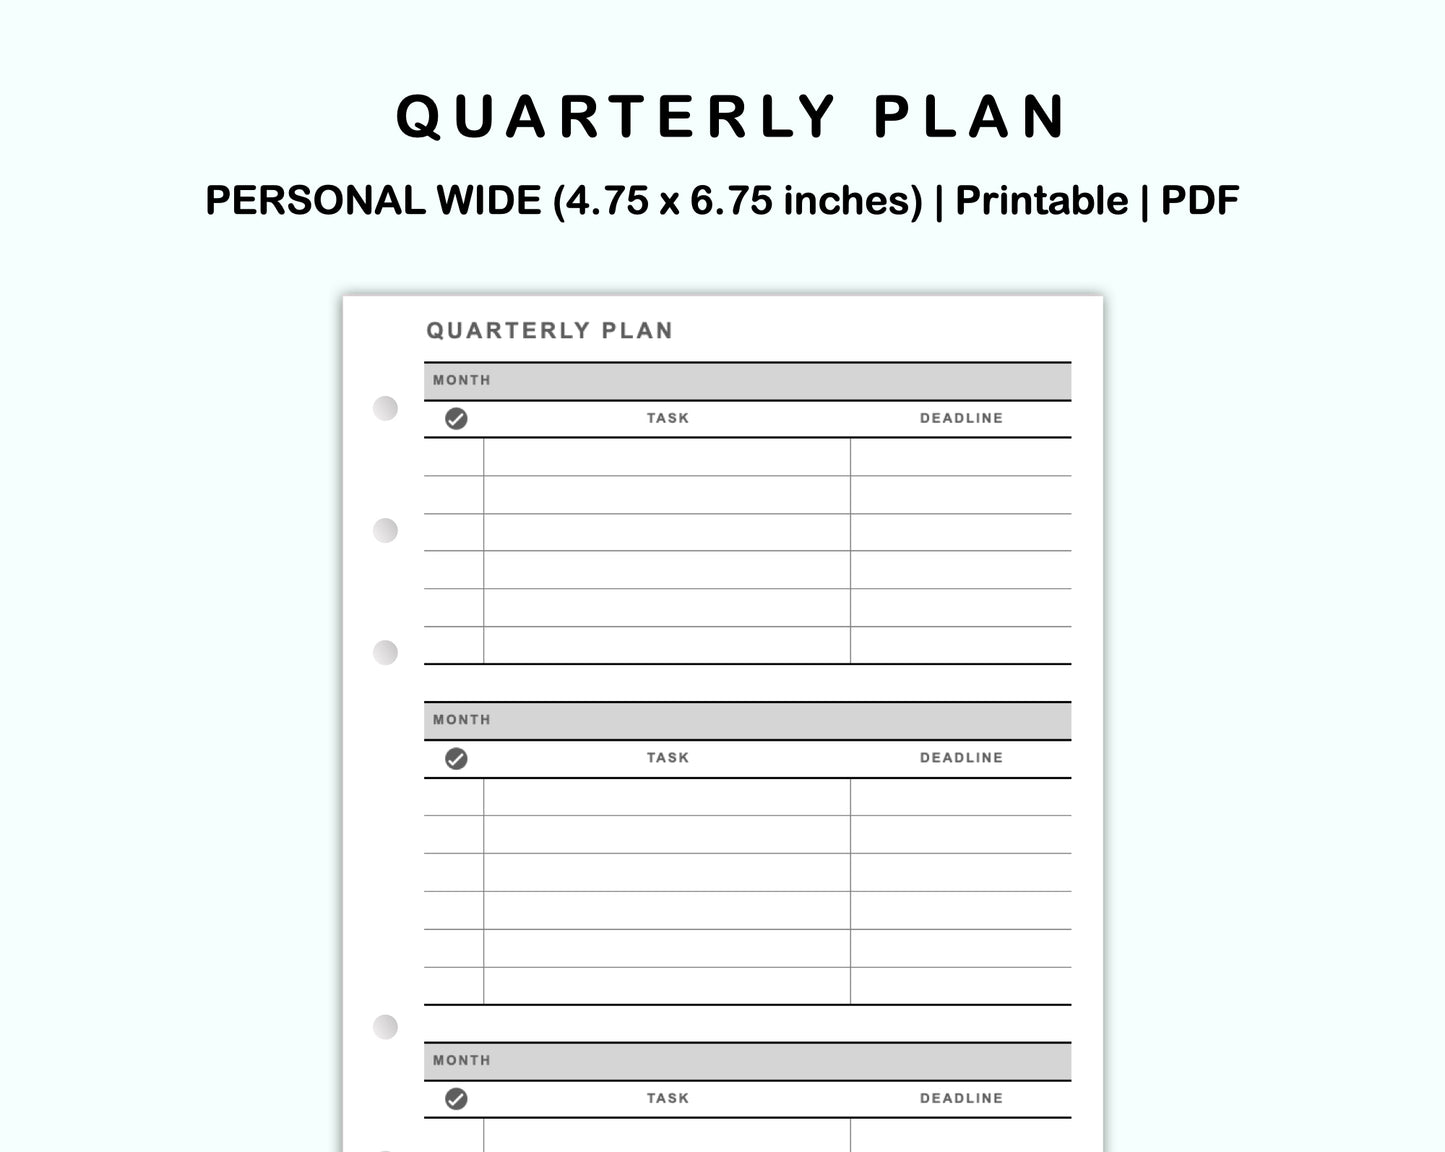 Personal Wide Inserts - Quarterly Plan